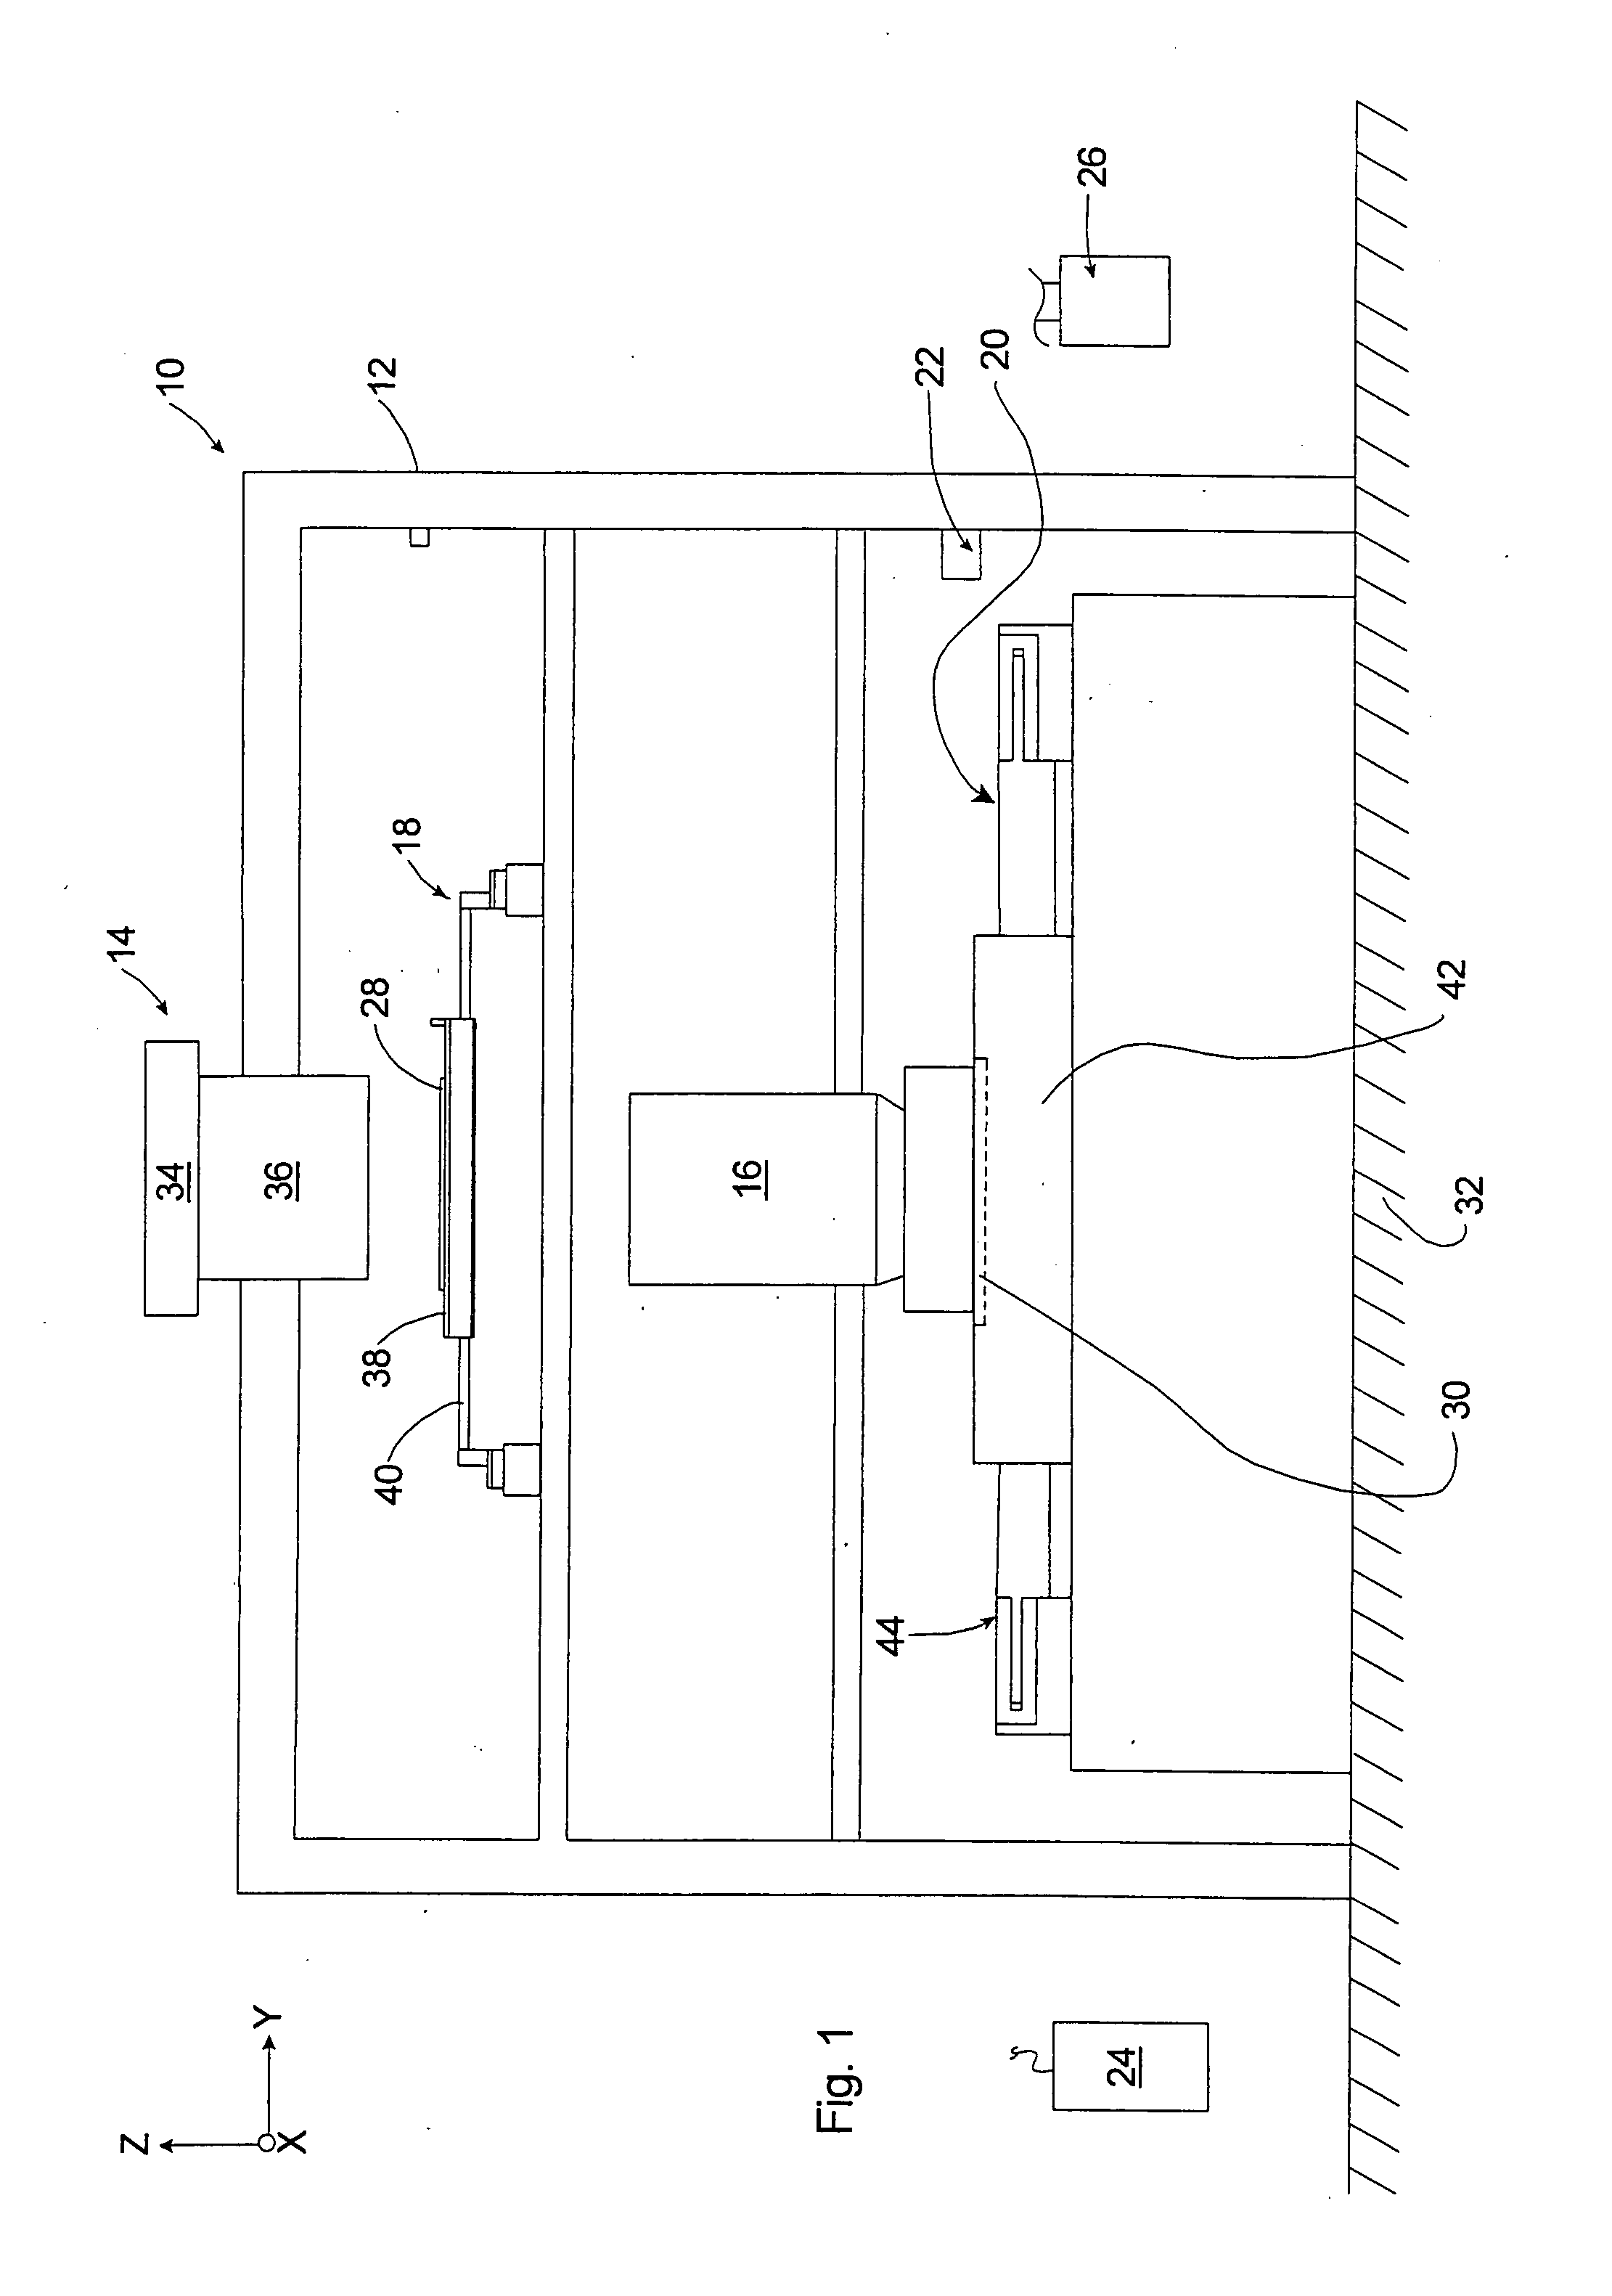 Apparatus and method for maintaining immersion fluid in the gap under the projection lens during wafer exchange in an immersion lithography machine